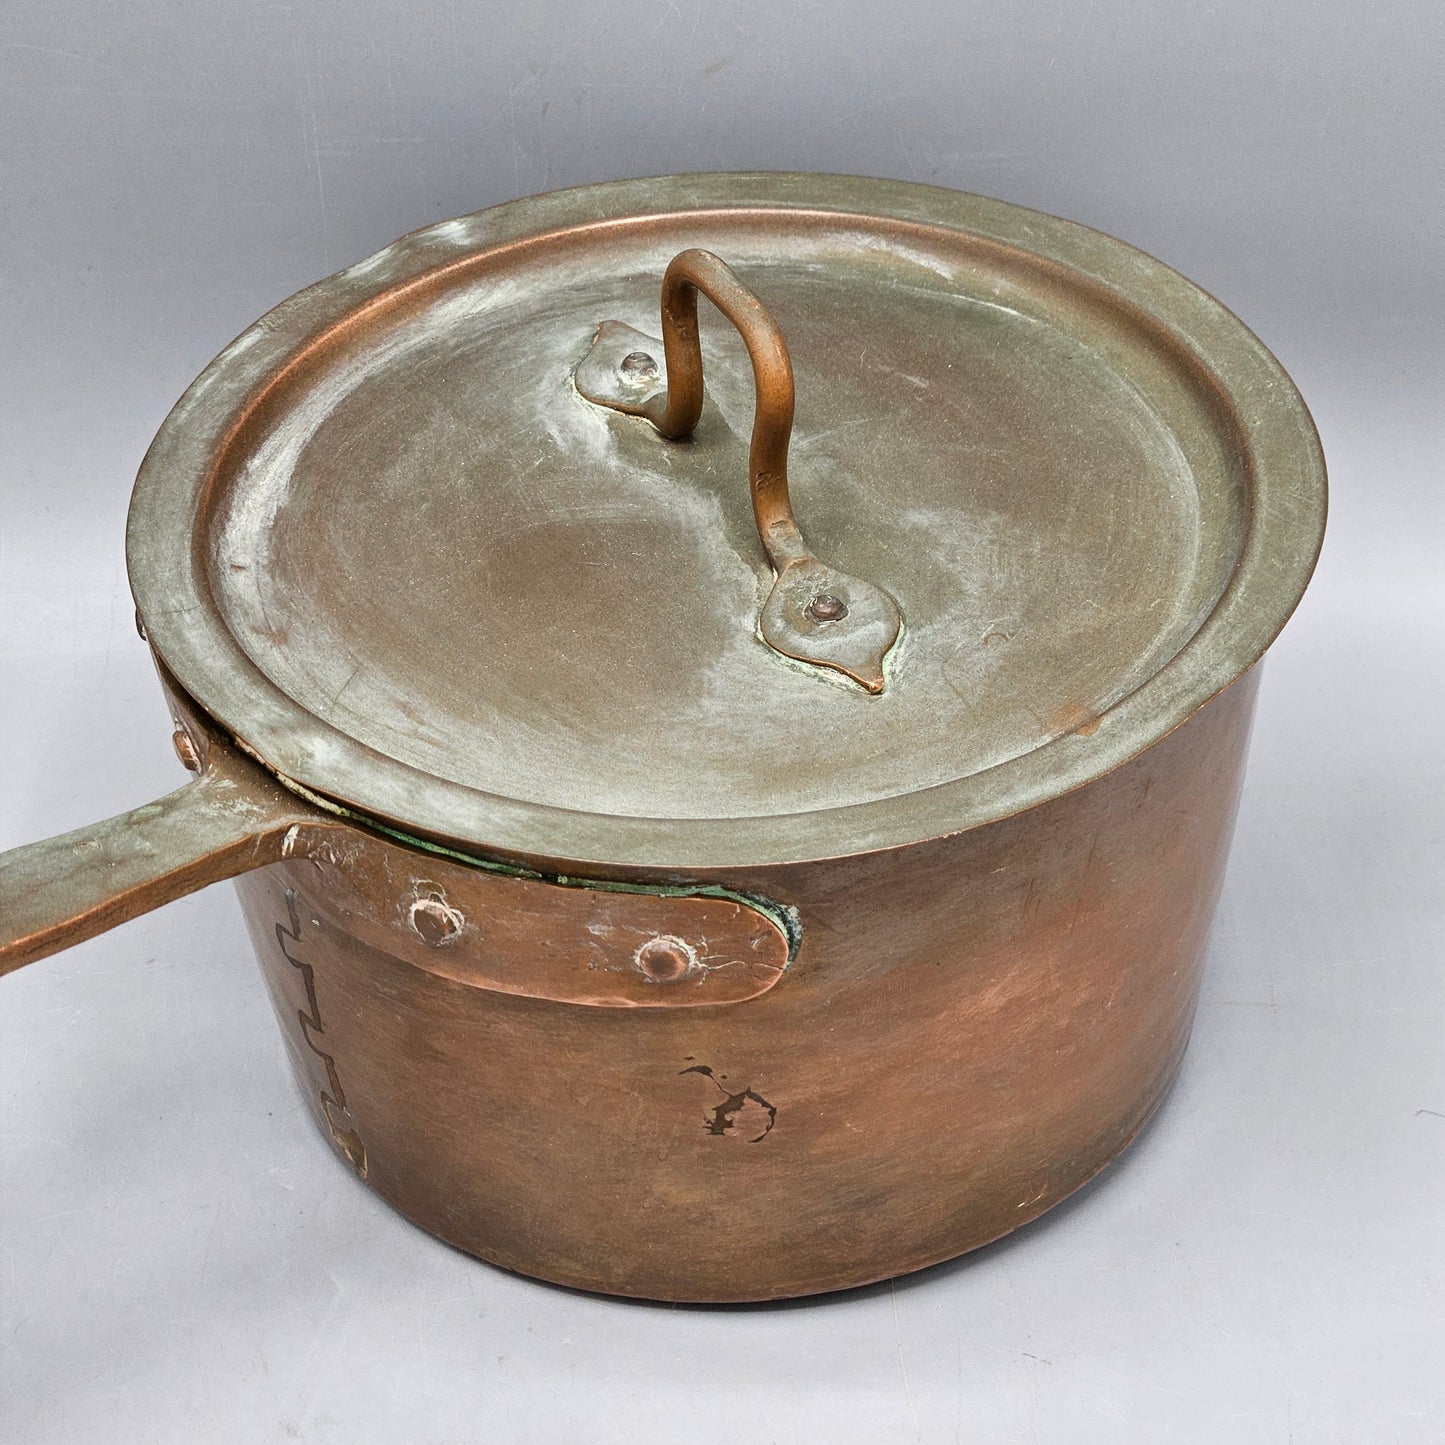 Vintage Copper Sauce Pan with Lid